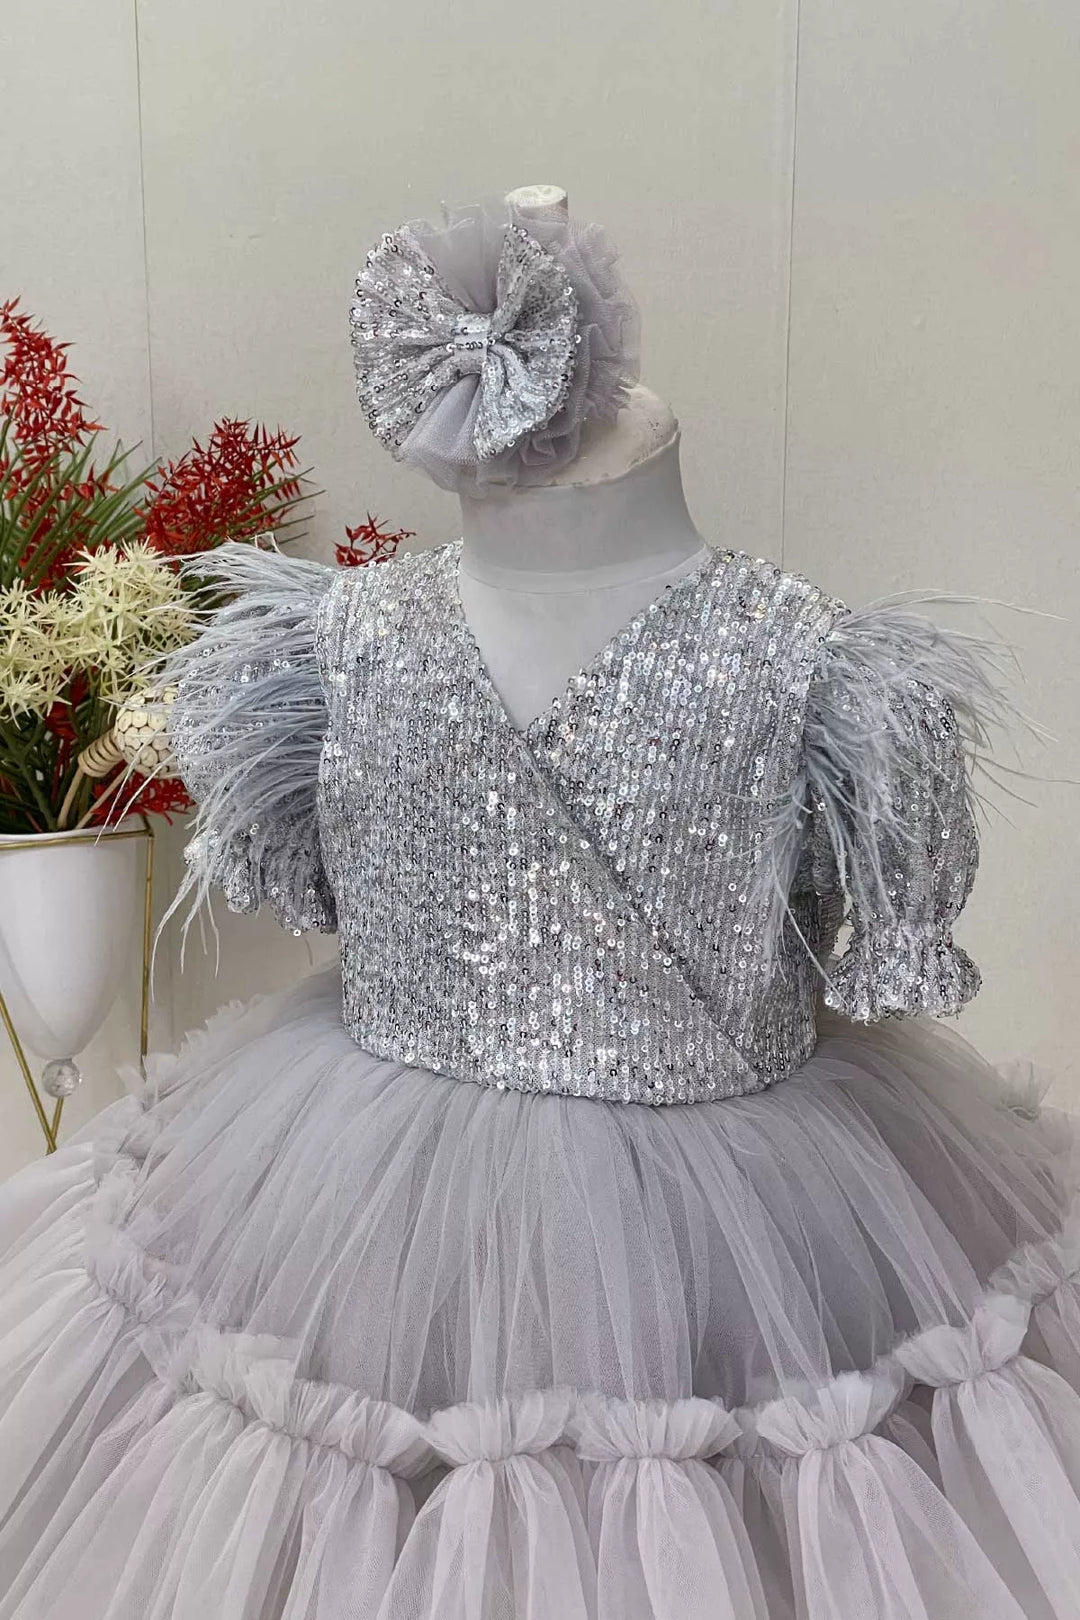 Close up view of a gray girl dress that has sequins, half sleeve, feathers, V-neck, and puffy skirt